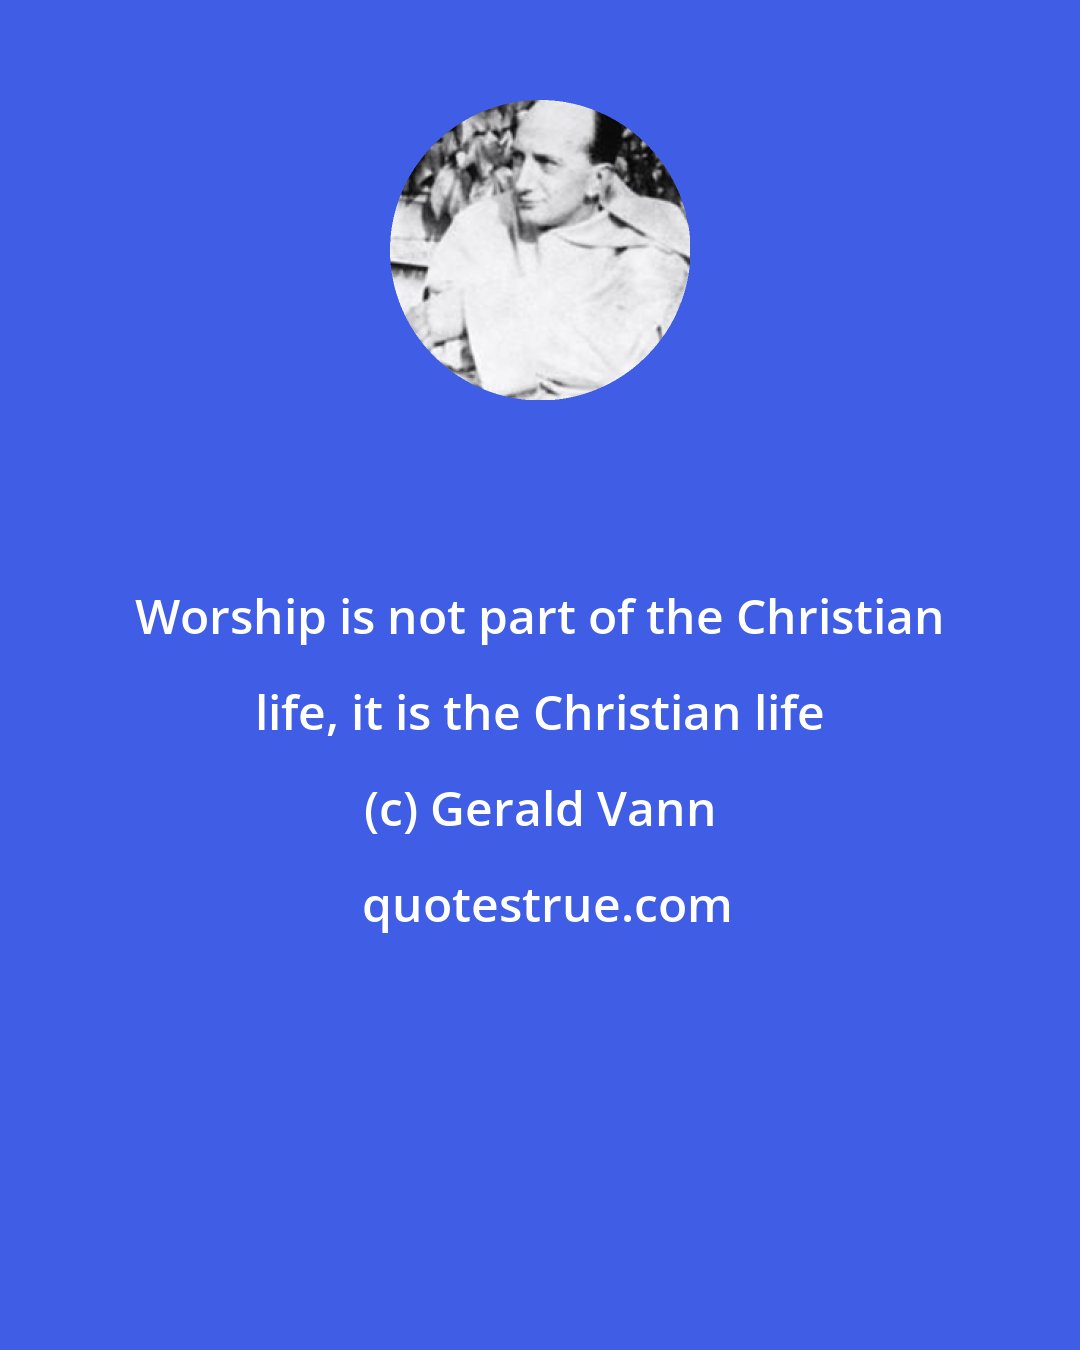 Gerald Vann: Worship is not part of the Christian life, it is the Christian life